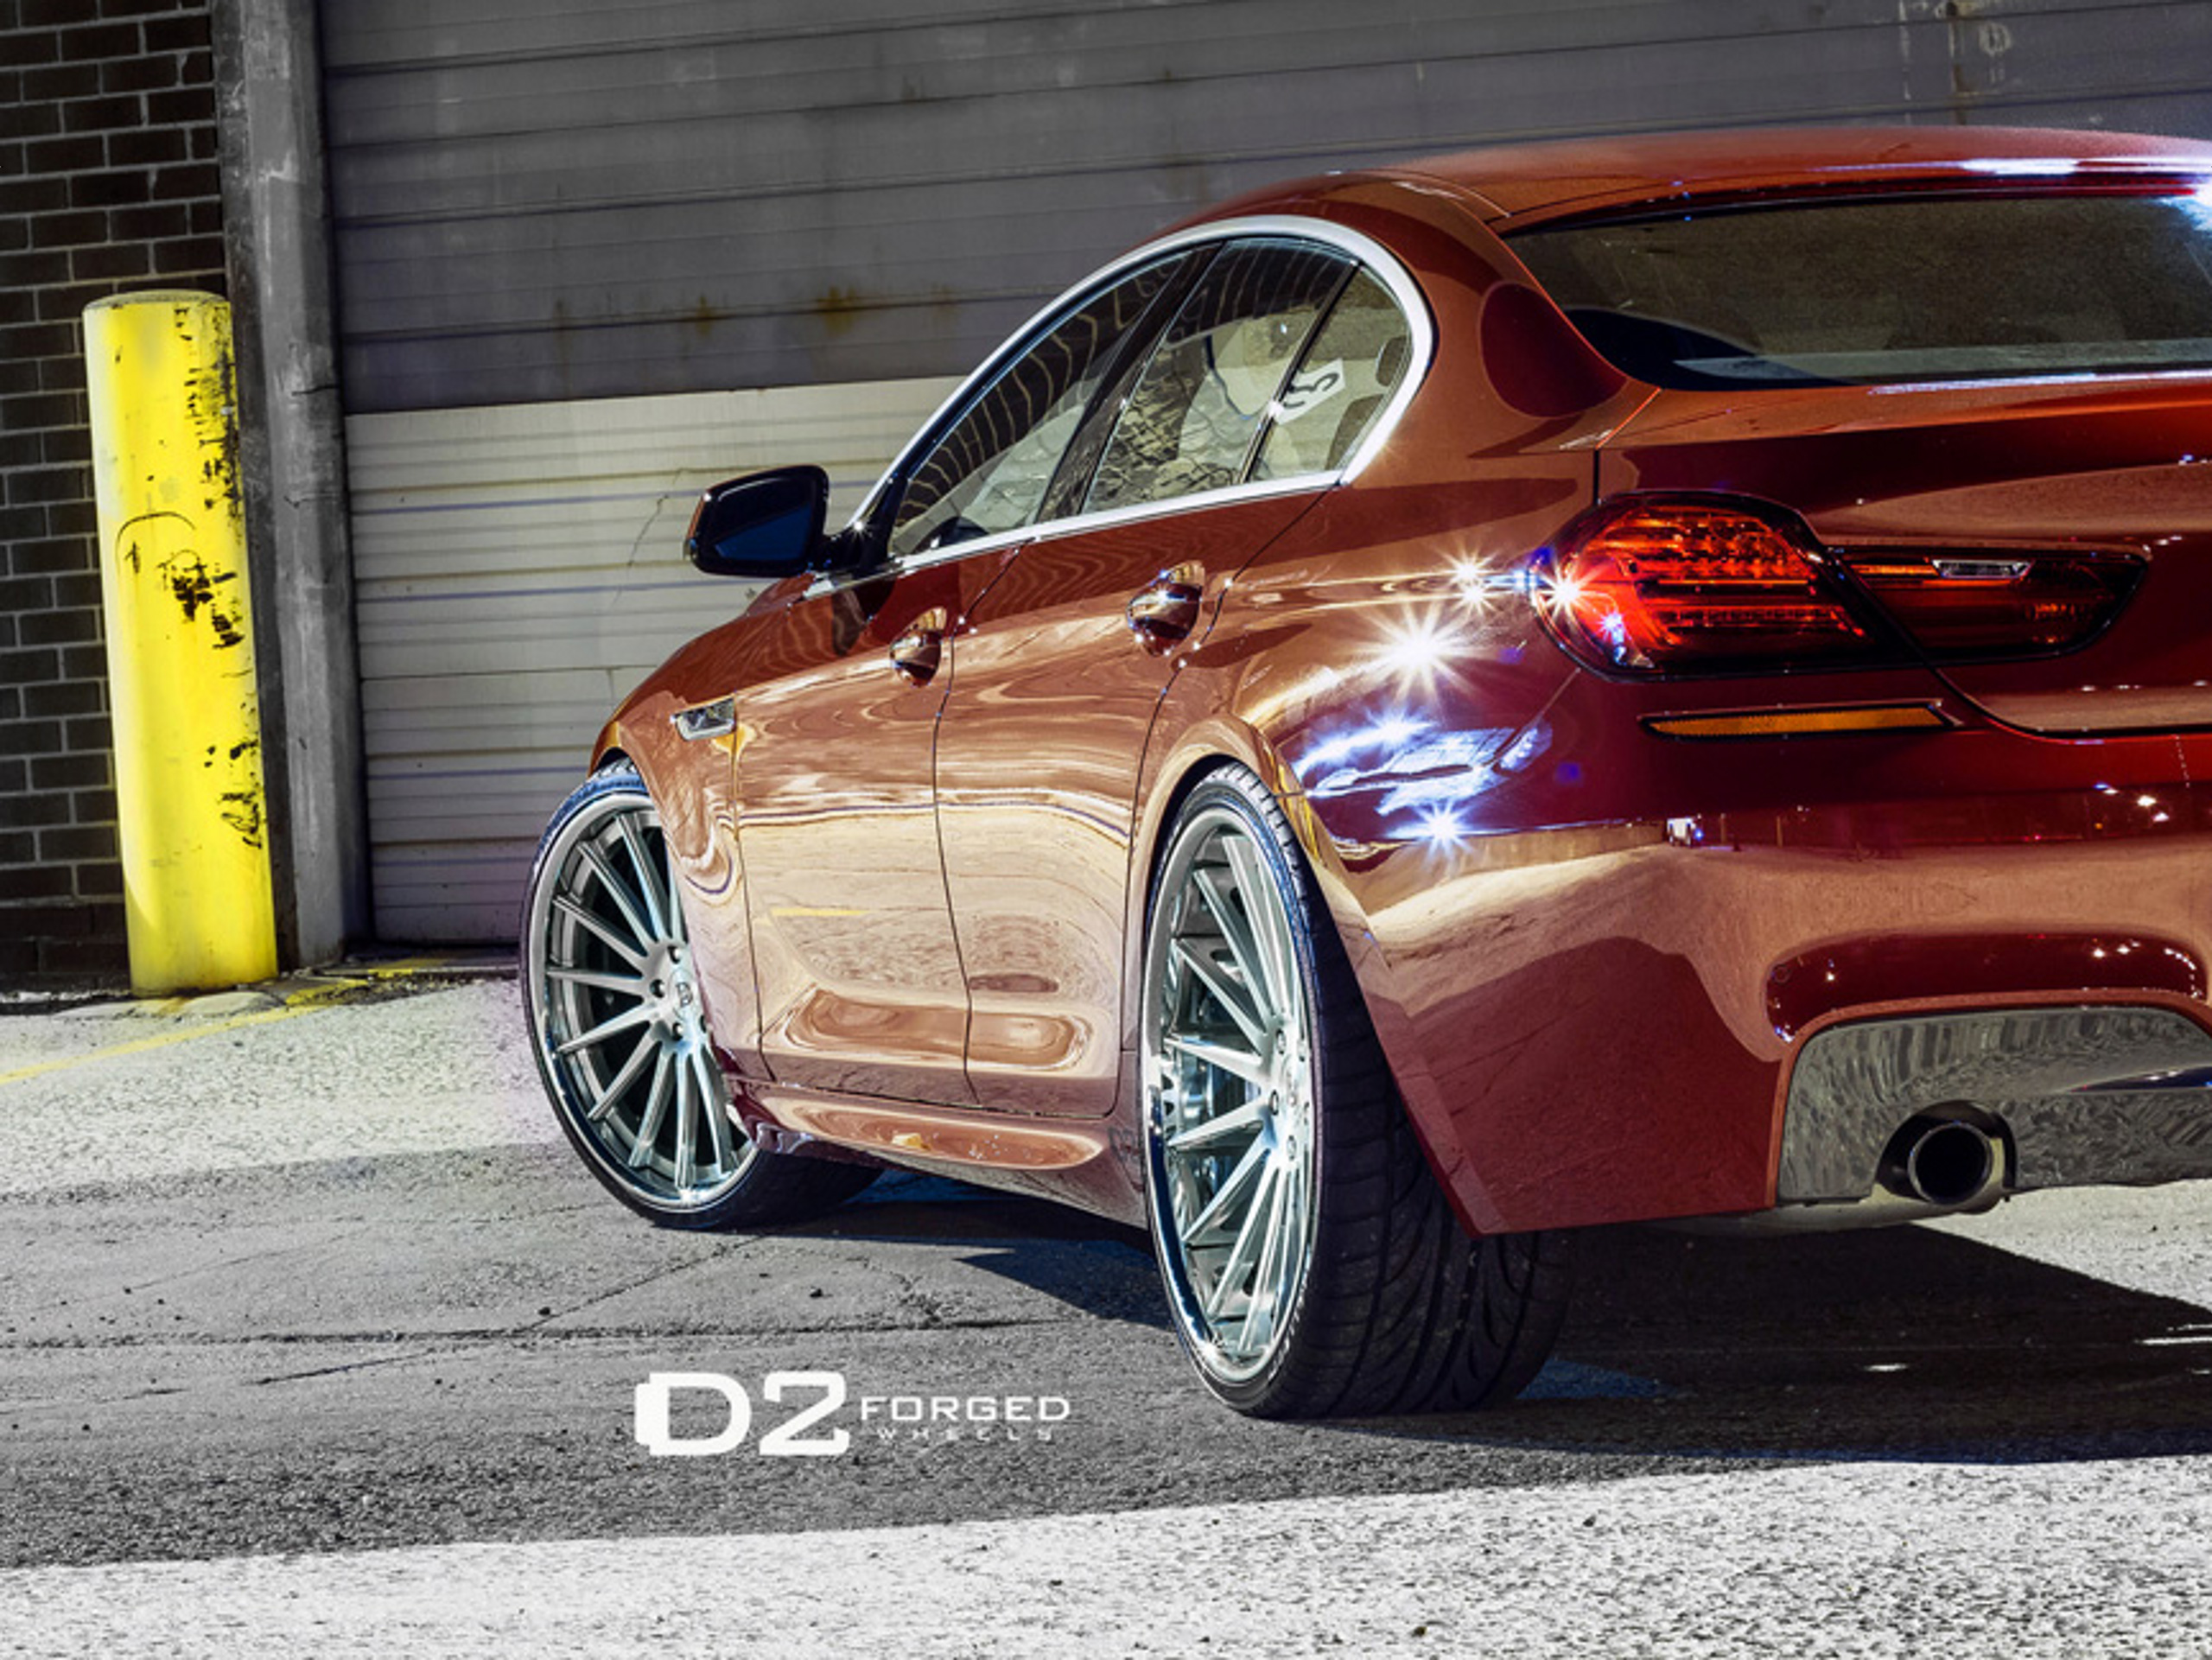 D2forged BMW 6er Gran Coupé Tuning: Neue Felgen in 22 Zoll